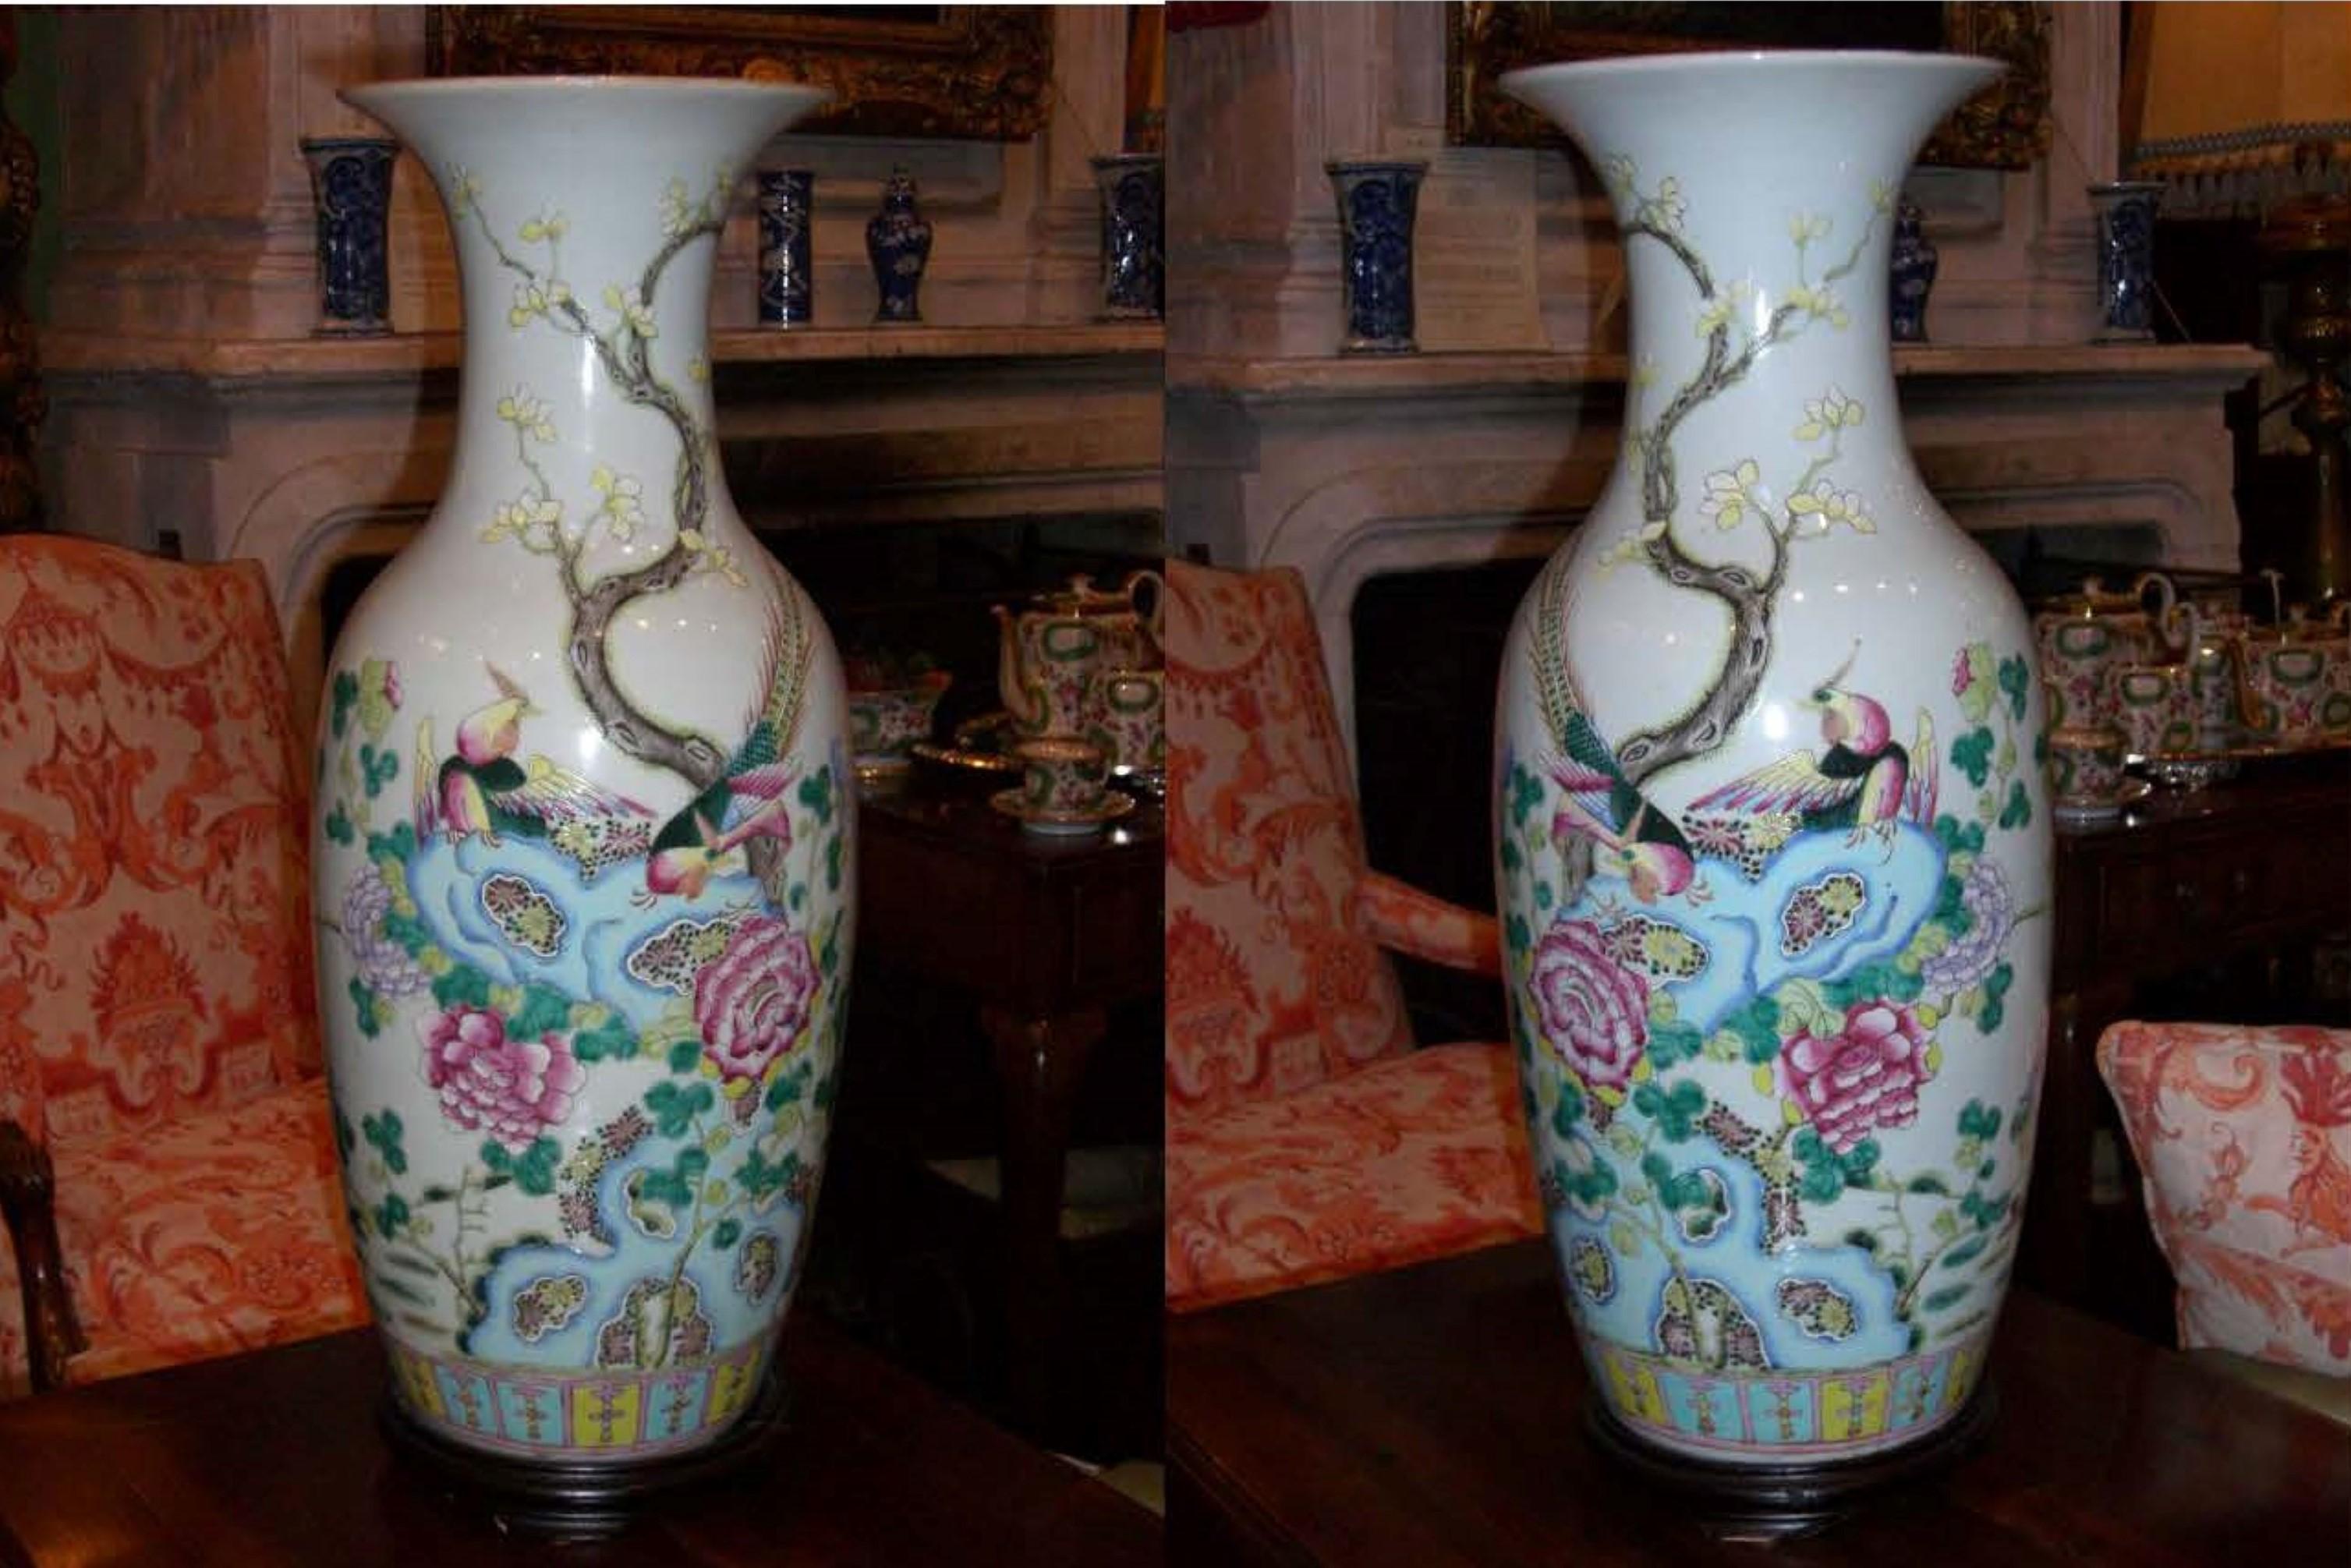 Very beautiful and detailed pair of Tao Kuang dynasty Chinese Porcelain vases circa 2nd half of the 19th Century Detailed colorful butterflies and Stork by the lake and the birds of paradise.
It could look amazing as a great center piece on a table,